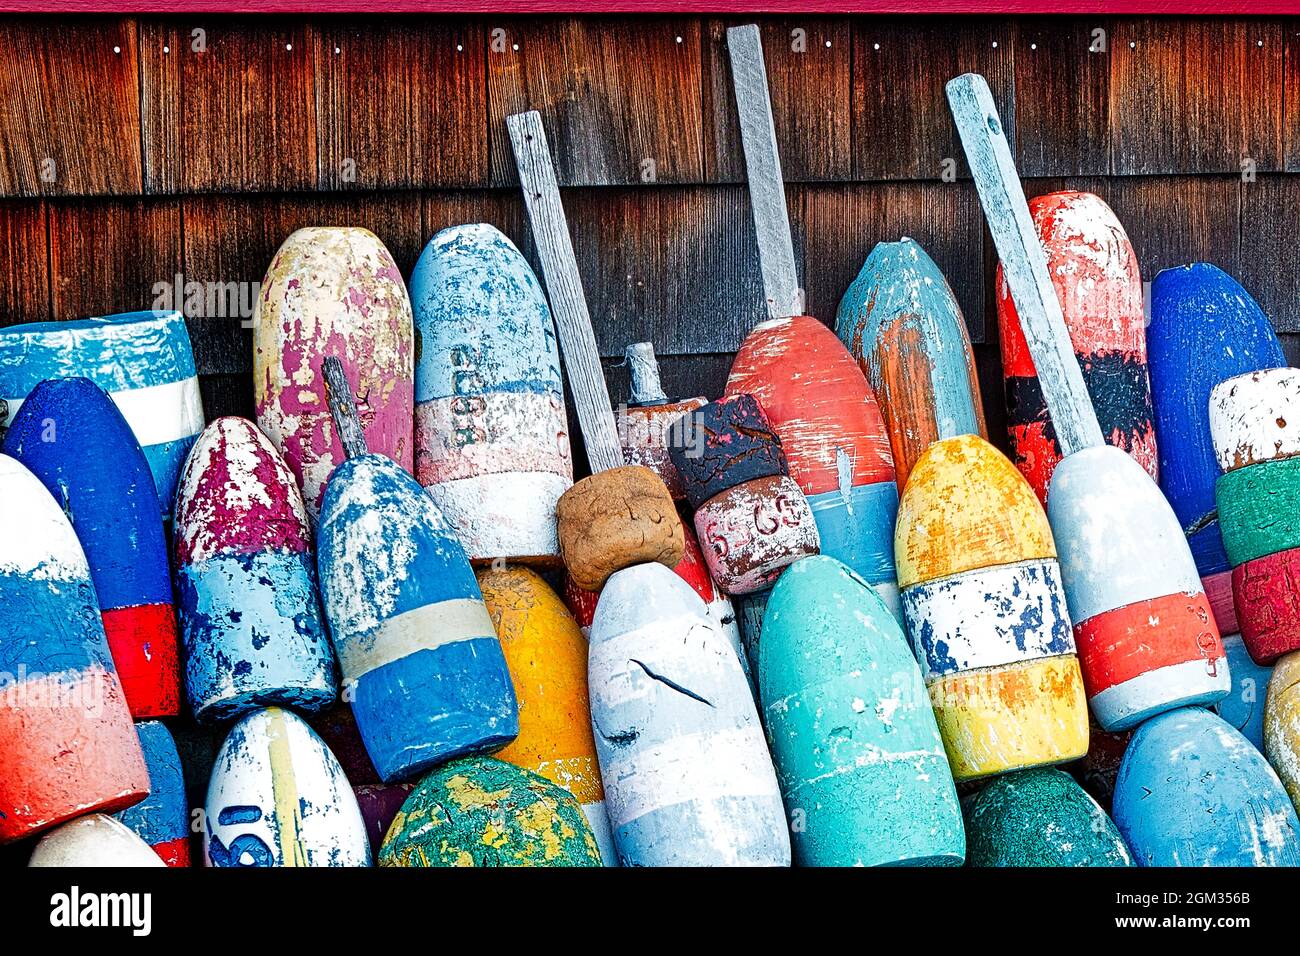 Fishing Buoys BW - Weathered but colorful fishing buoys found at Bradley Wharf at the seaport village in Rockport, Massachusetts.  This image is avail Stock Photo